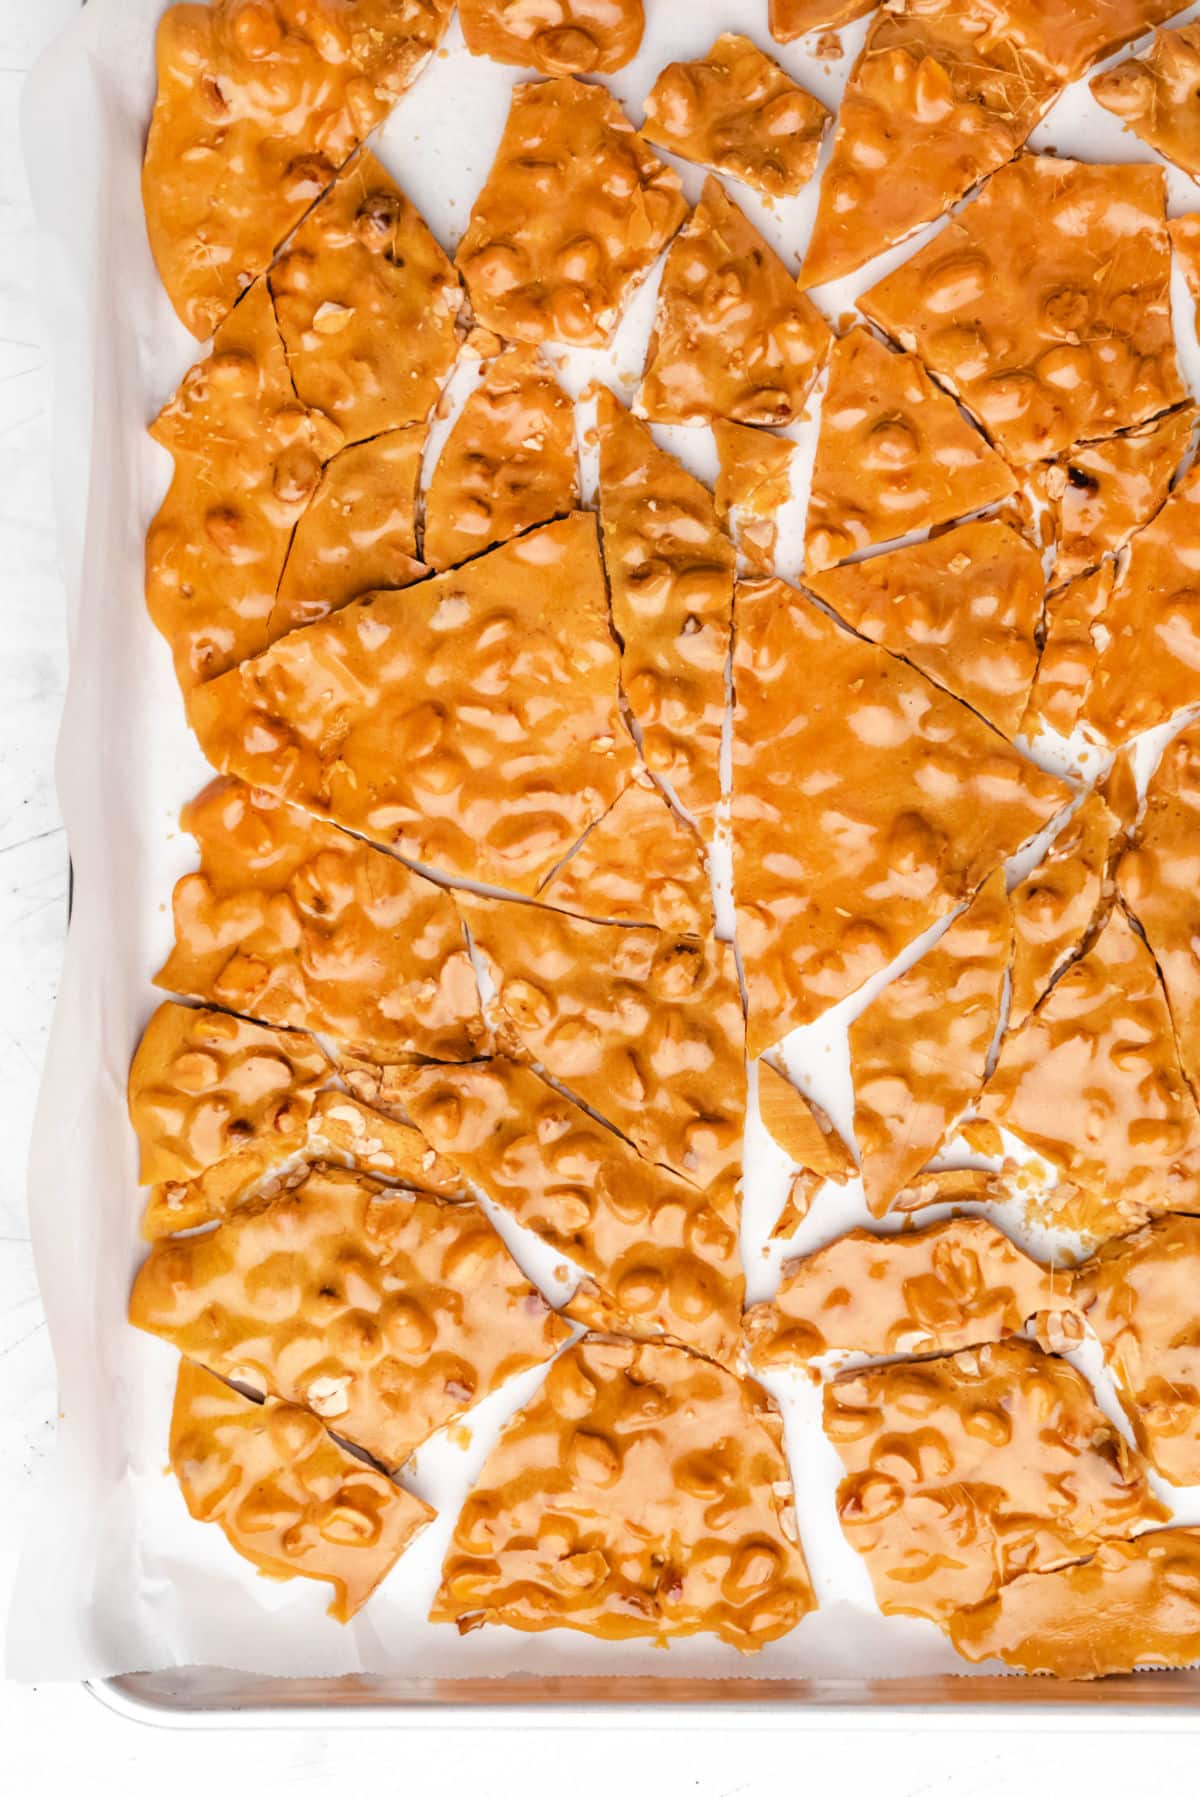 Broken pieces of peanut brittle on a baking tray. 